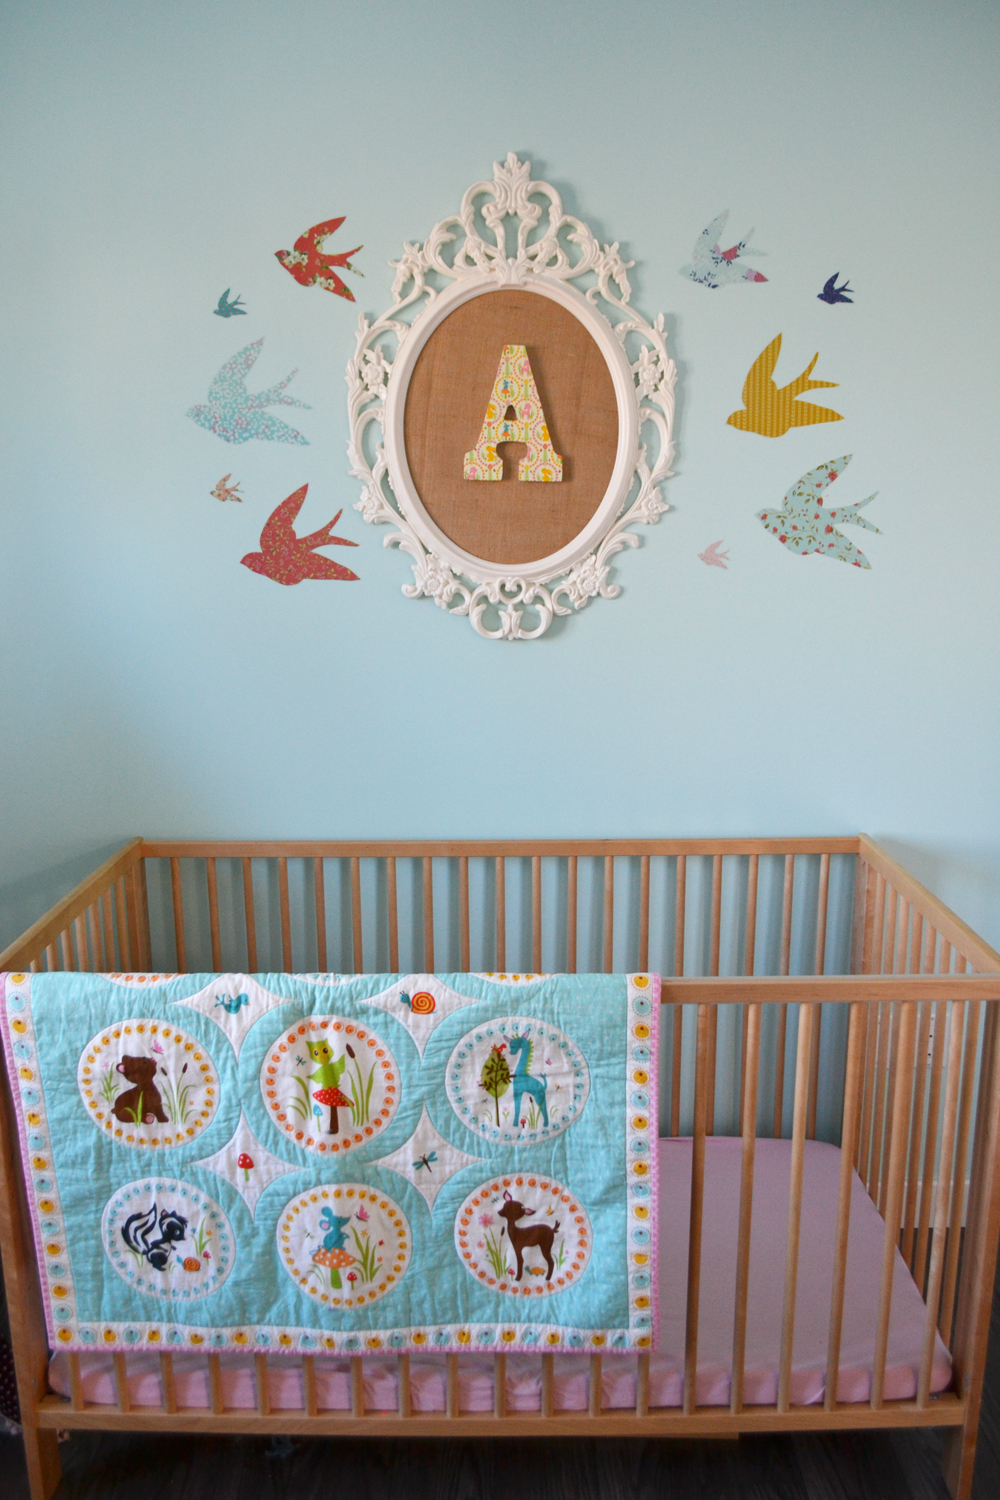 A Sunny Woodland Nursery. This sweet nursery is decorated in aqua, yellow, blush pink and chocolate brown and features a ton of inexpensive DIY decor elements.